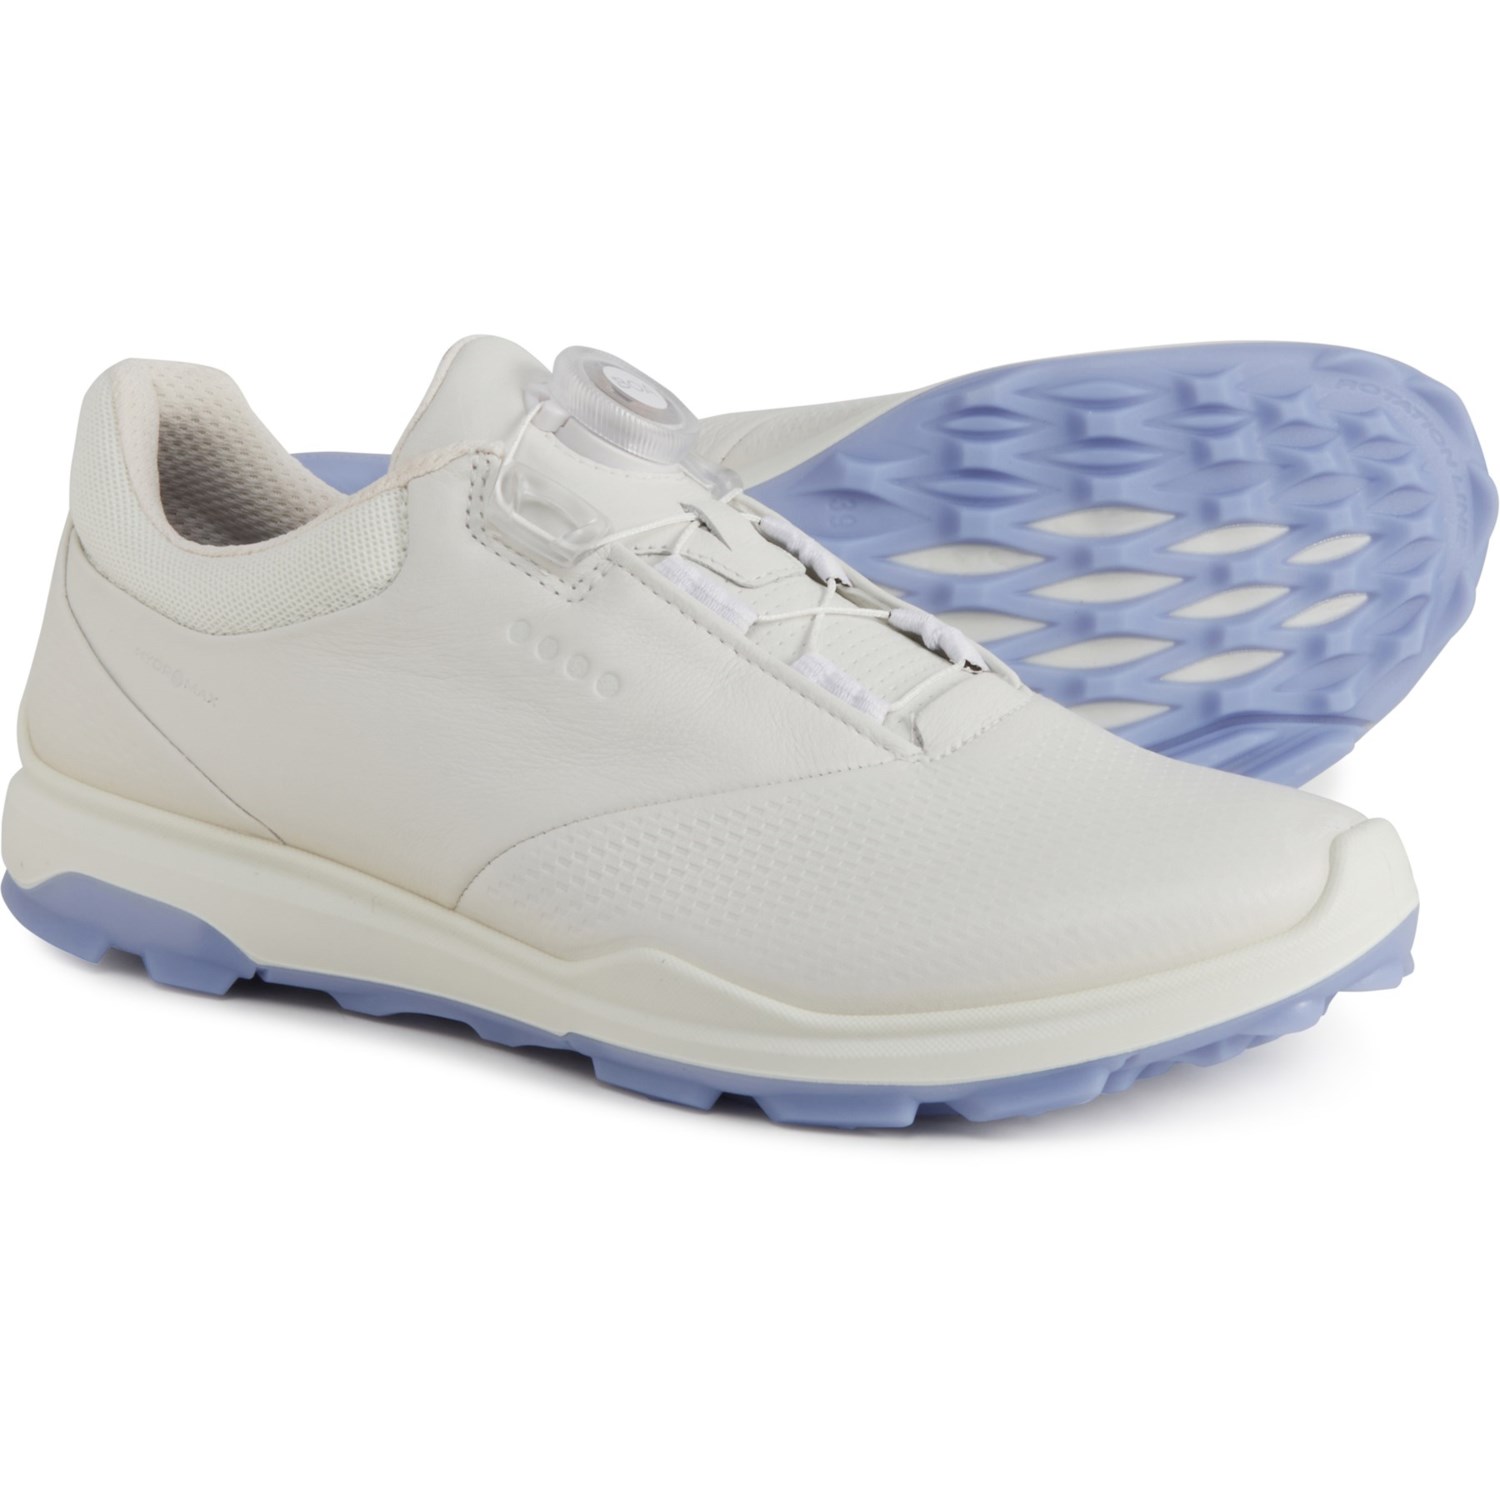 Turist Shipwreck ambition ECCO BIOM® Hybrid 3 Racer Golf Shoes (For Women) - Save 33%